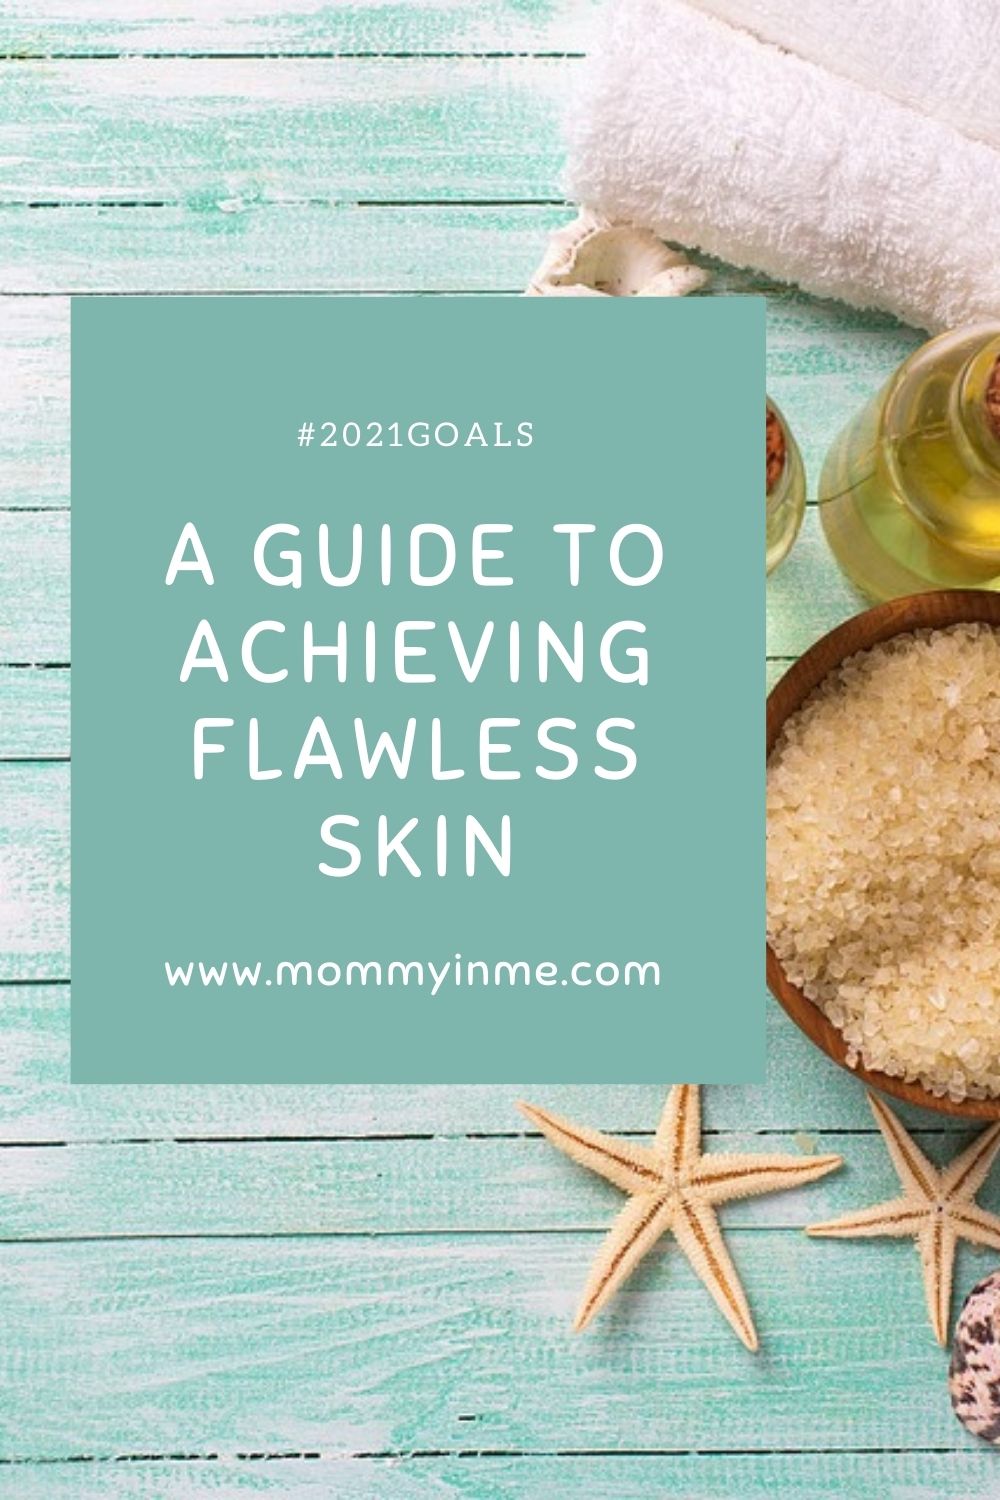 How to achieve that flawless skin that you could flaunt on social media? Well read on for some tips to achieve a spotless skin #skincare #flawlessskin #fiama #gelbars #fiamagelbars #celebrationpack #qualitysleep 